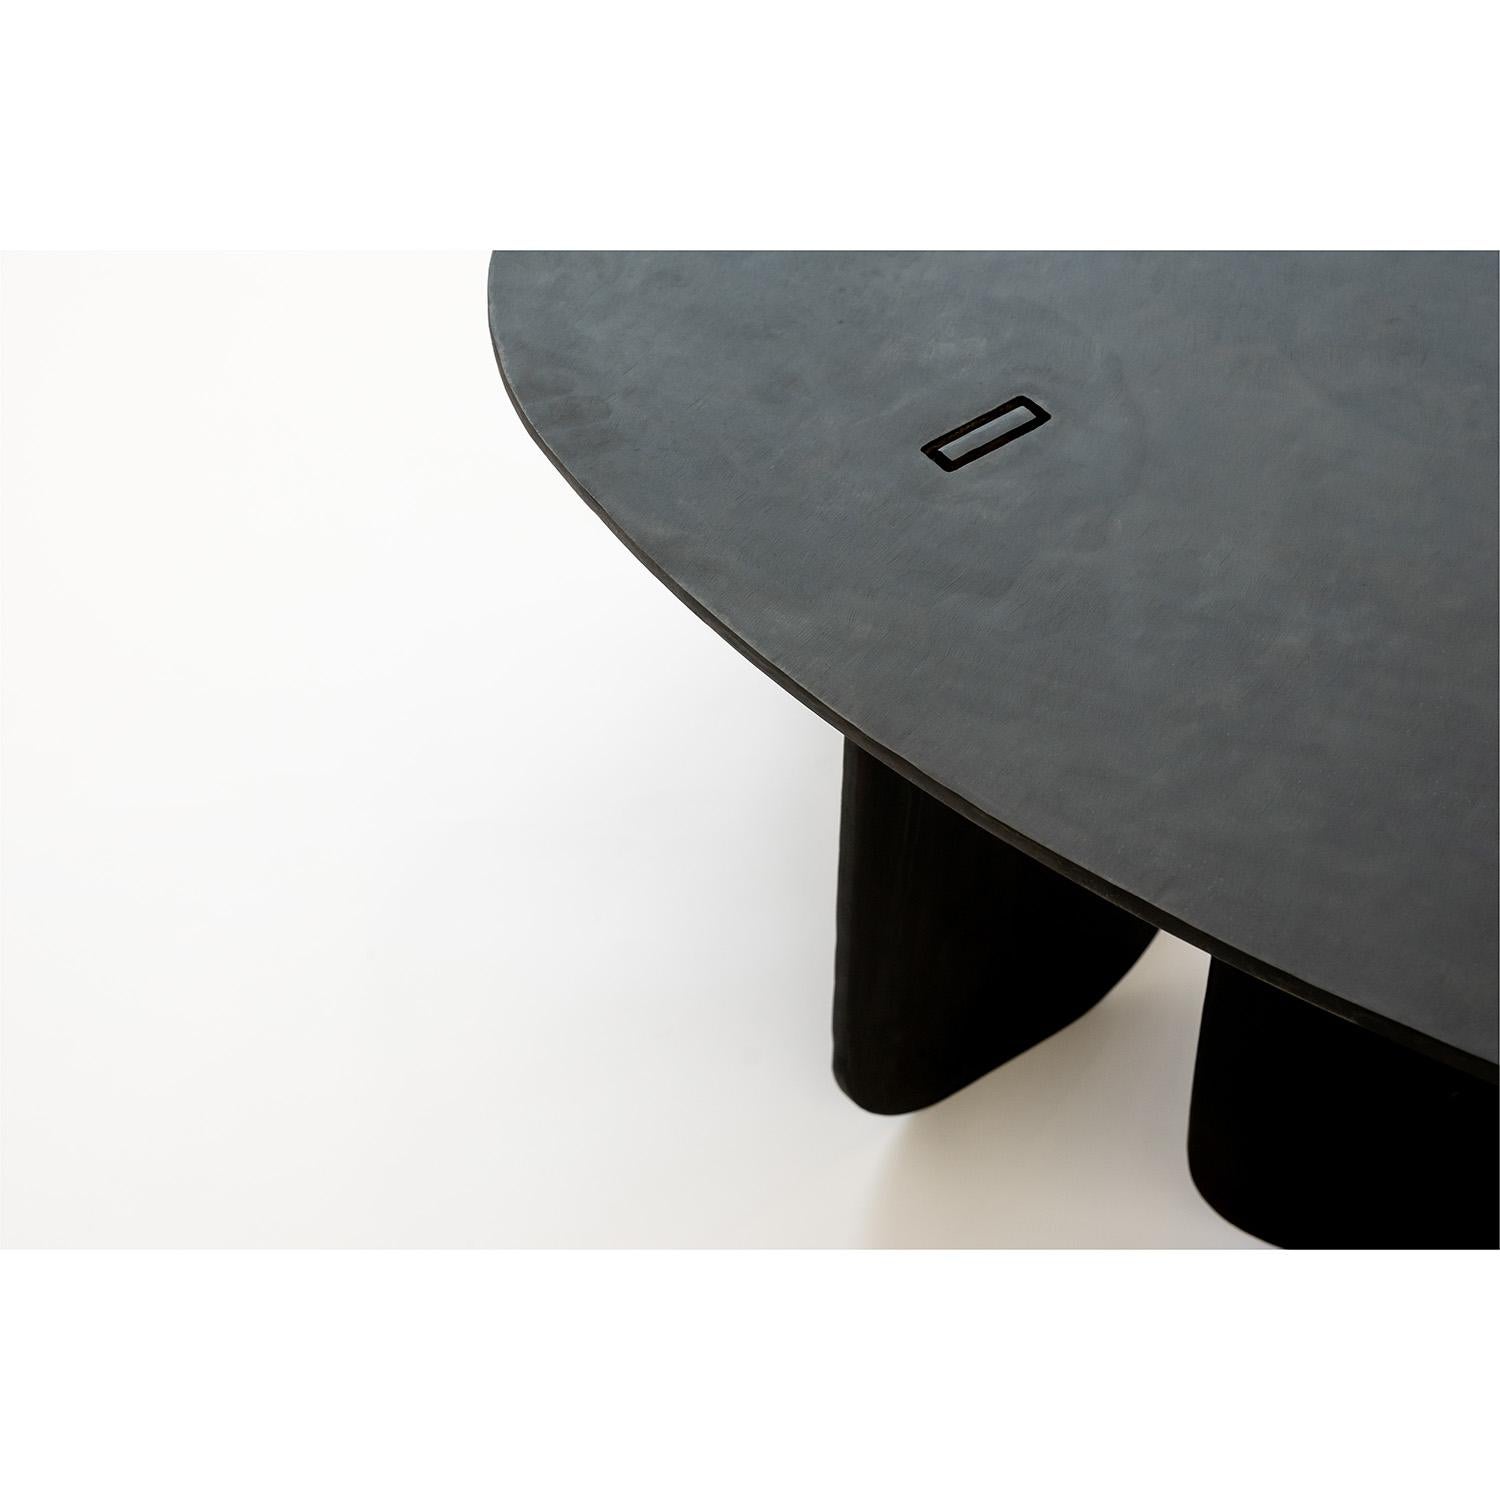 TABLE NO. 15 - SIDE TABLE 
J.M. Szymanski
d. 2019

This Noguchi-inspired side table is handcrafted in 3/8” thick steel, with a natural black patina and wax finish, to create an ulta-modern and inspired look. 

Custom sizes available. Made in the